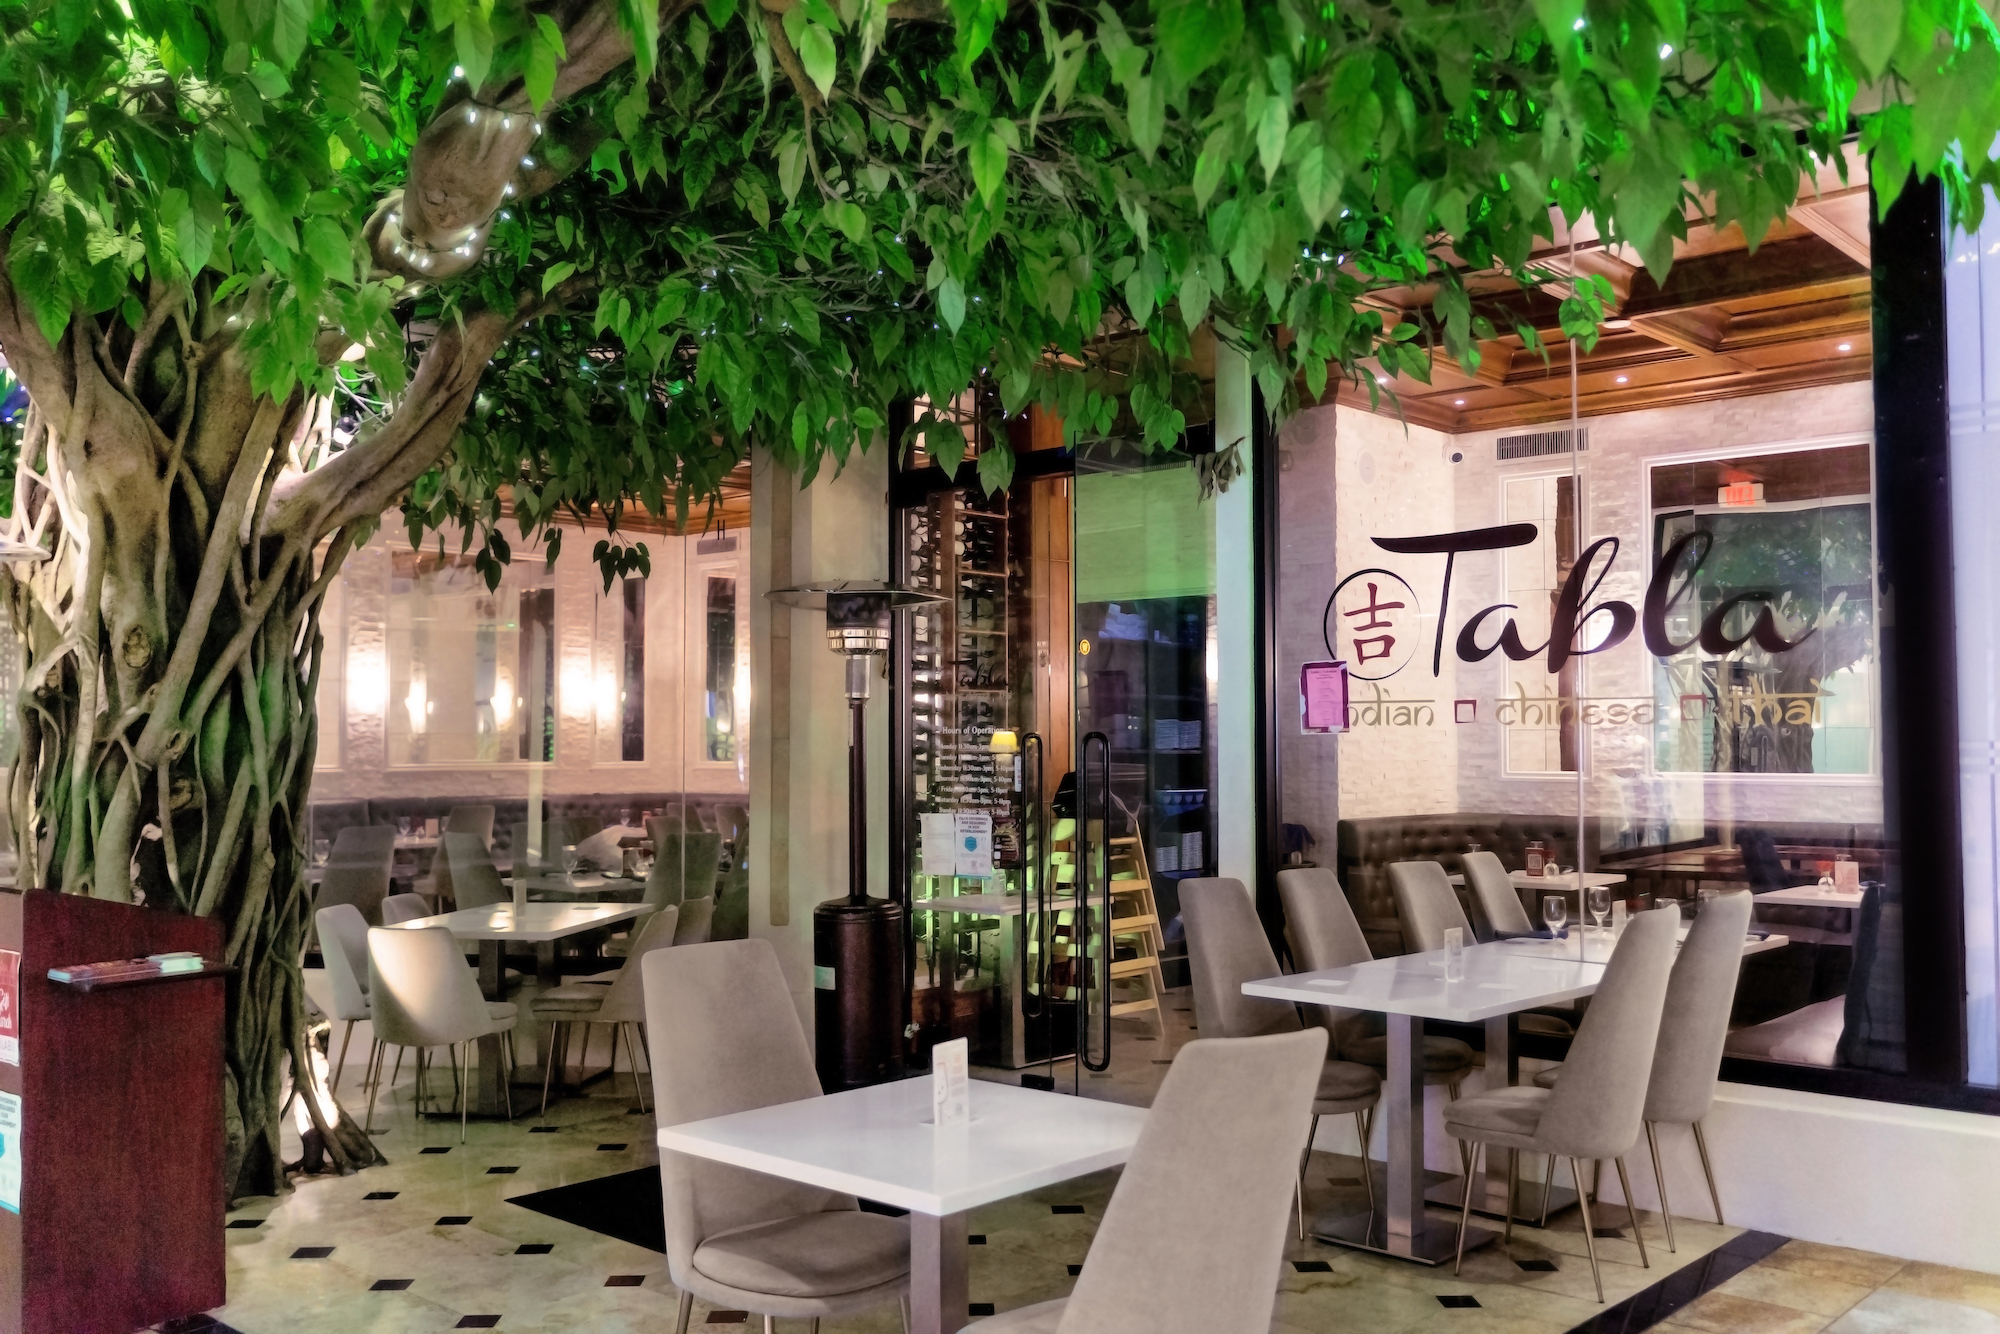 The front of Tabla restaurant shows a live tree hovering above the entrance door, along with tables outside.